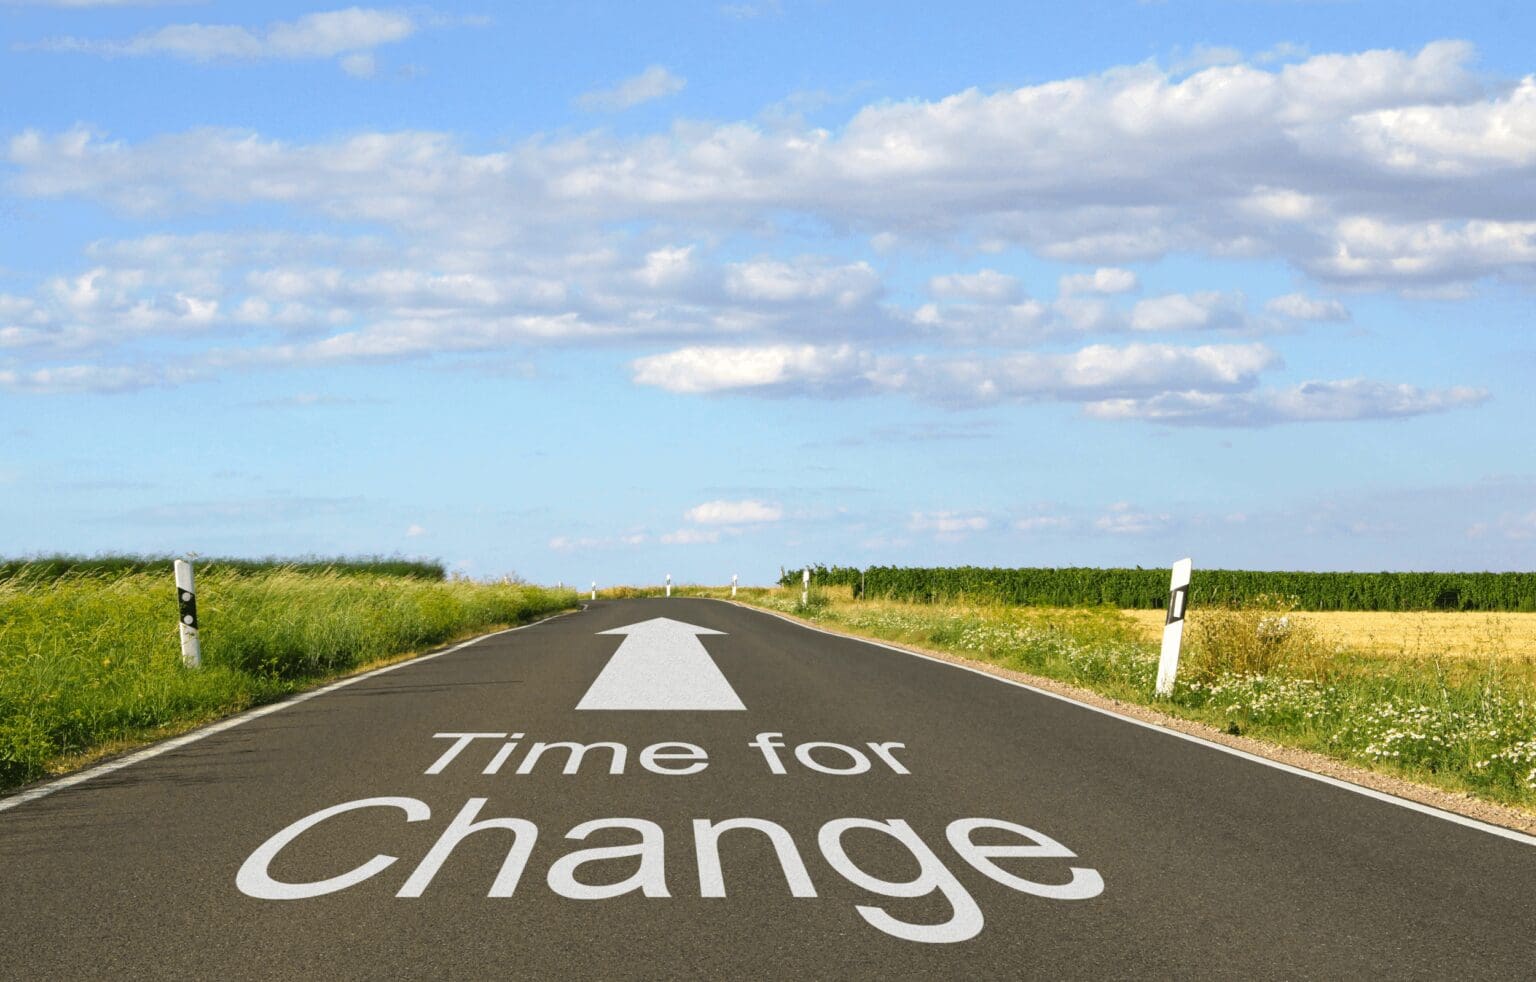 A road with the phrase “Time for Change”